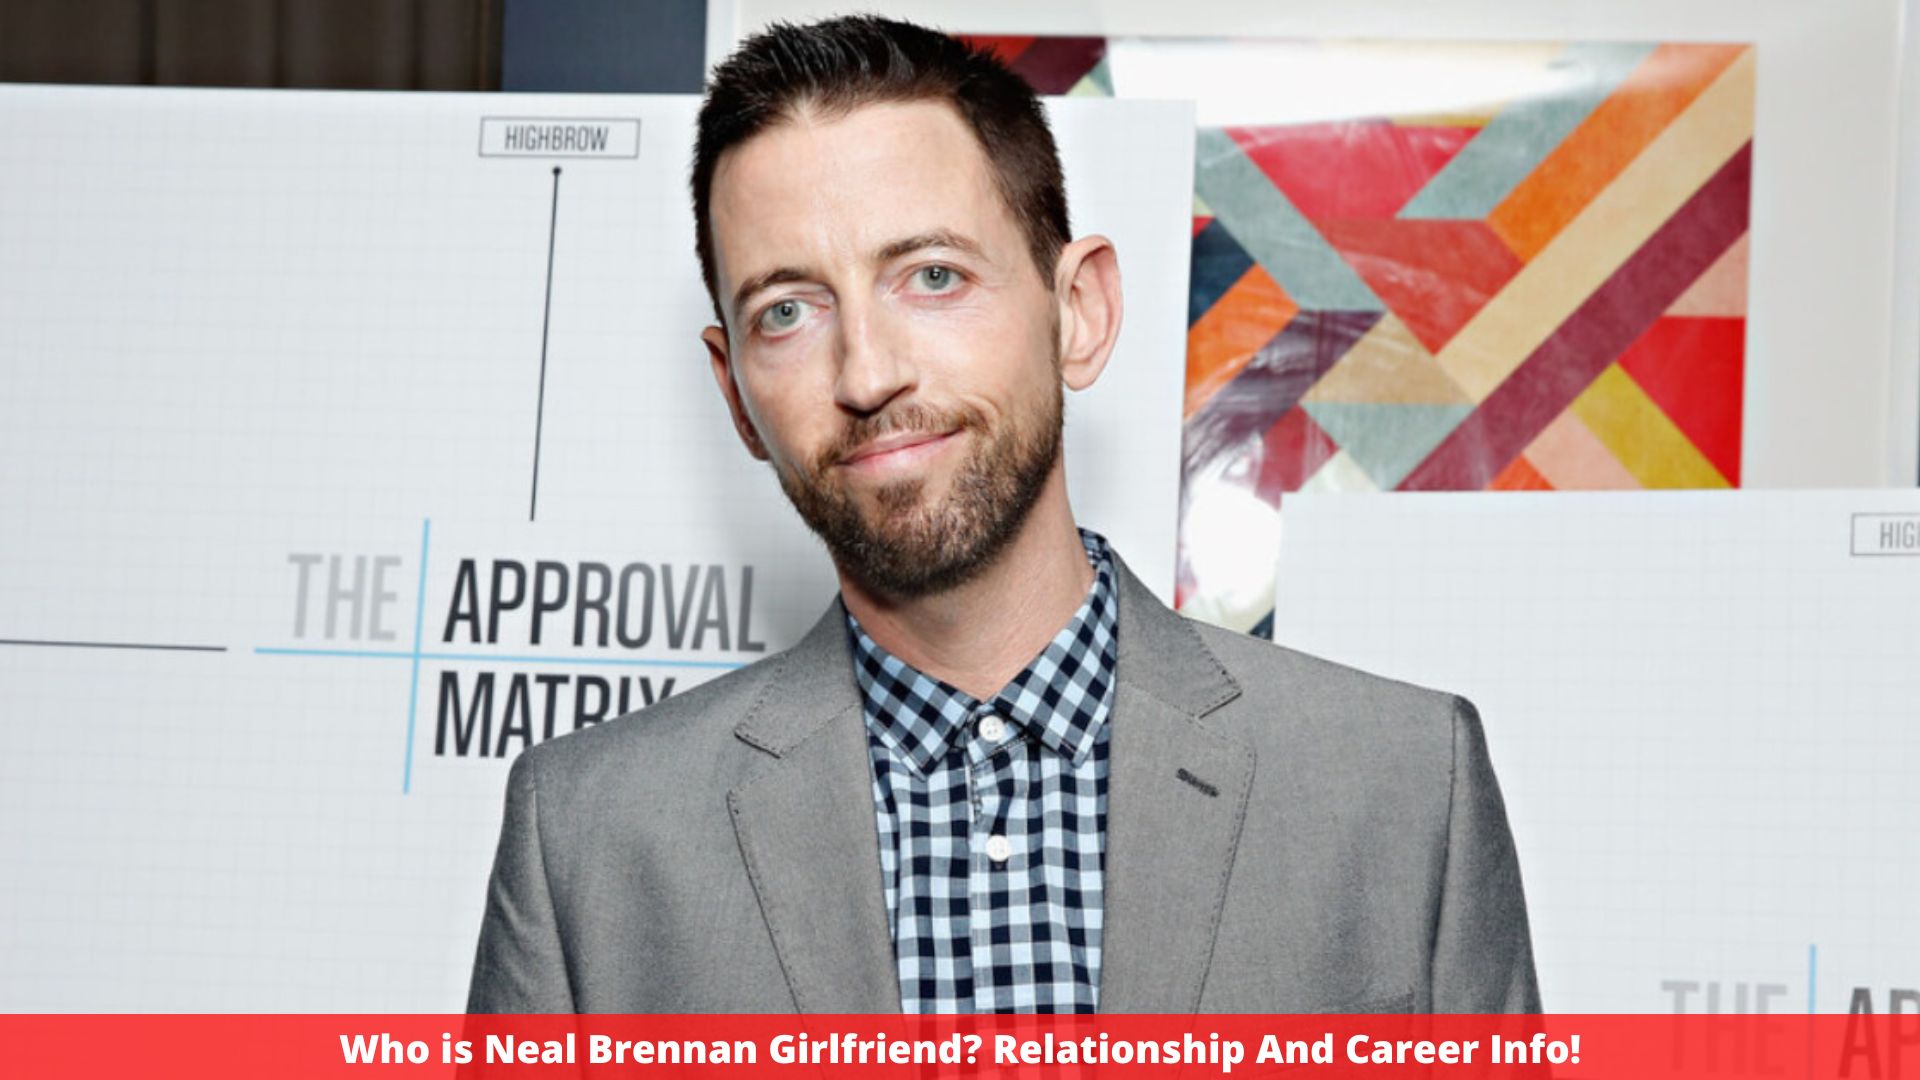 Who is Neal Brennan Girlfriend? Relationship And Career Info!